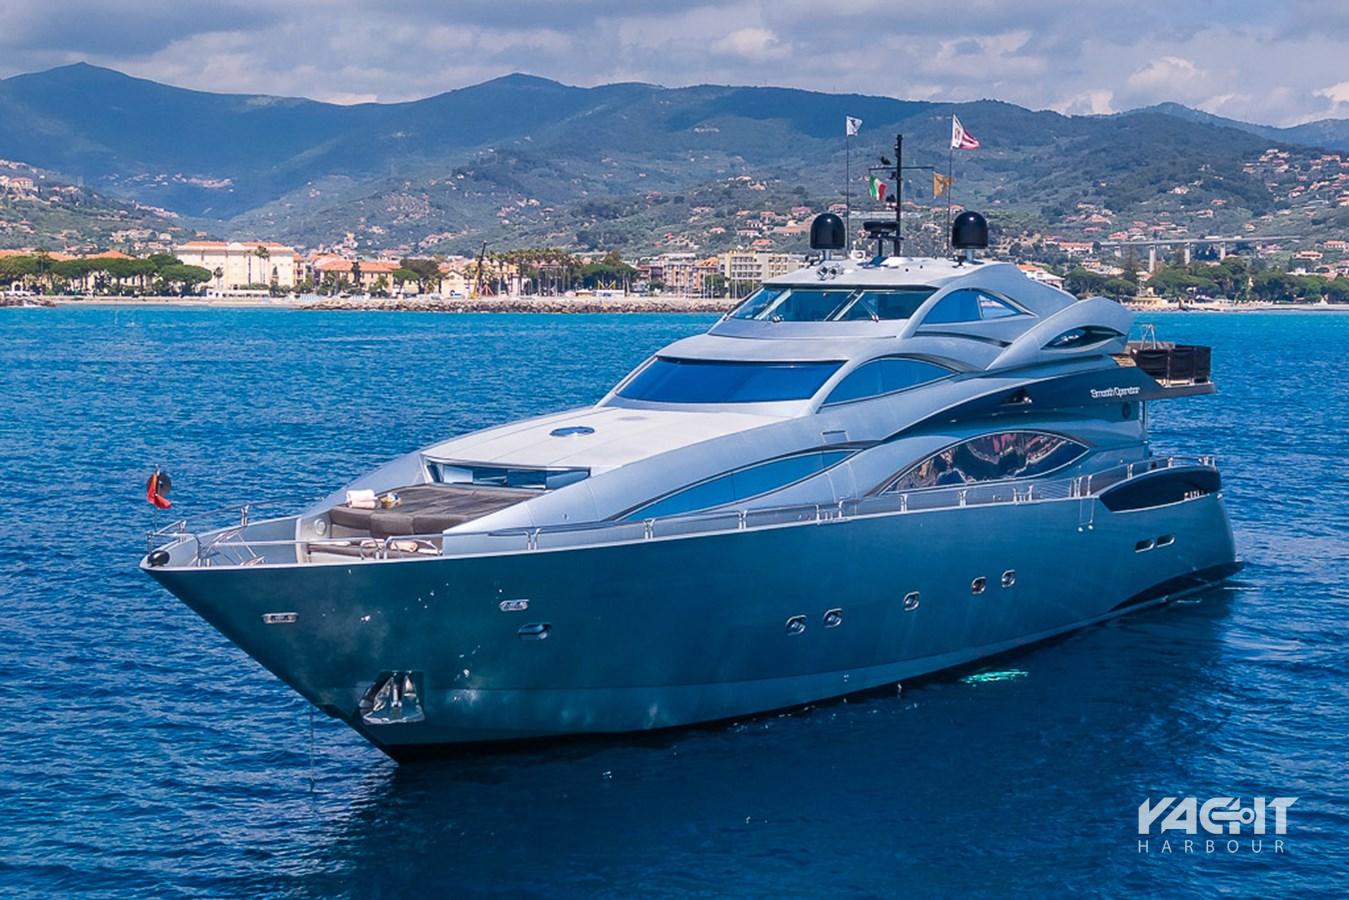 who owns smooth operator yacht